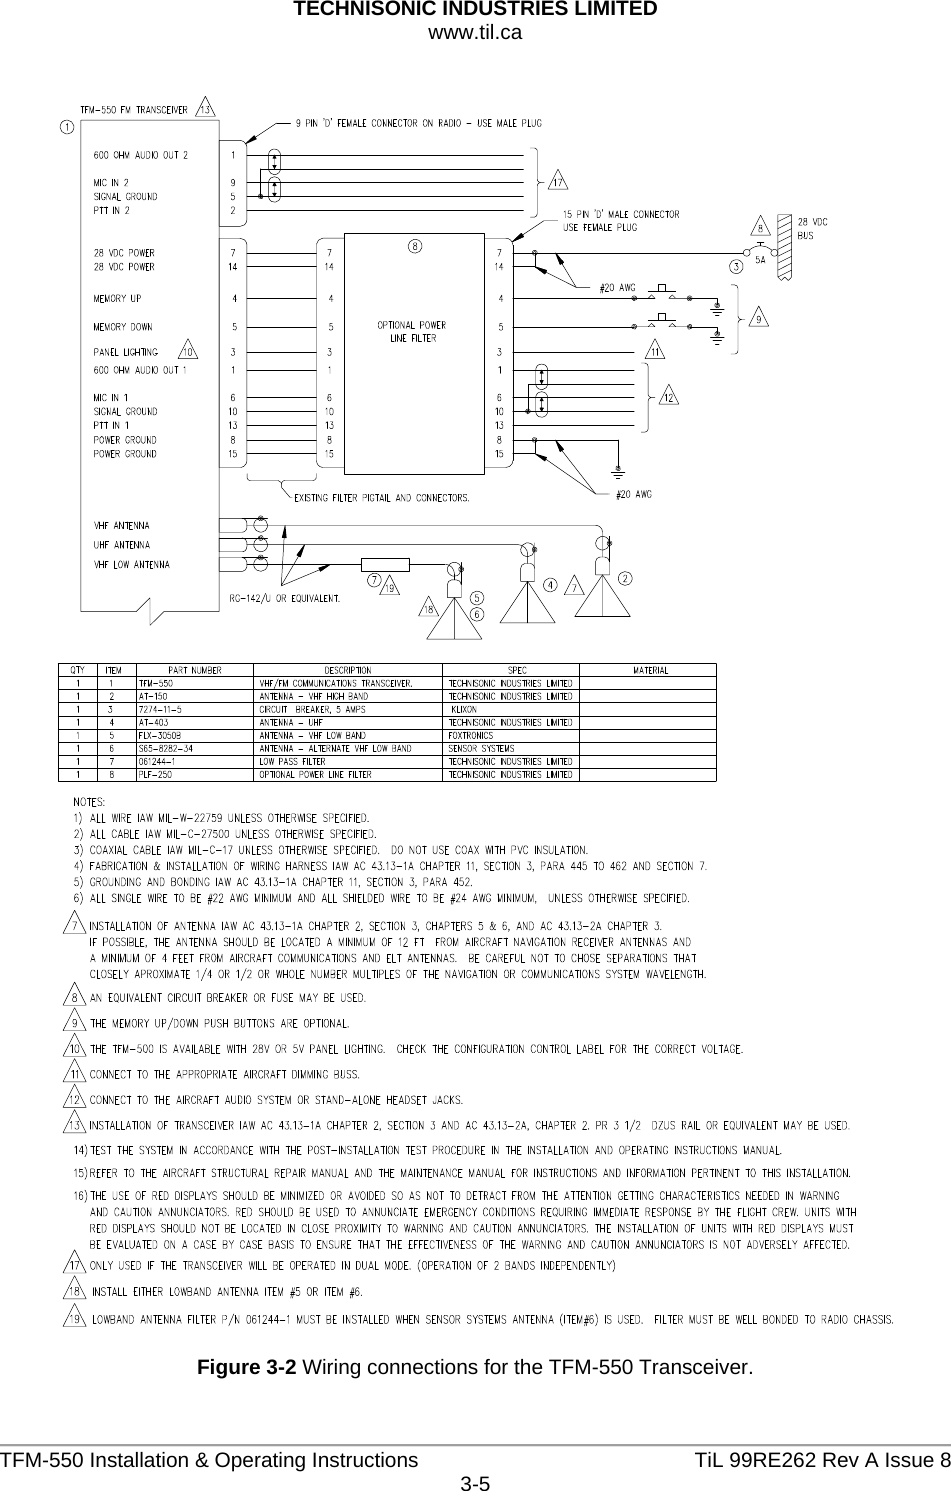 TECHNISONIC INDUSTRIES LIMITED www.til.ca   TFM-550 Installation &amp; Operating Instructions  TiL 99RE262 Rev A Issue 83-5    Figure 3-2 Wiring connections for the TFM-550 Transceiver. 